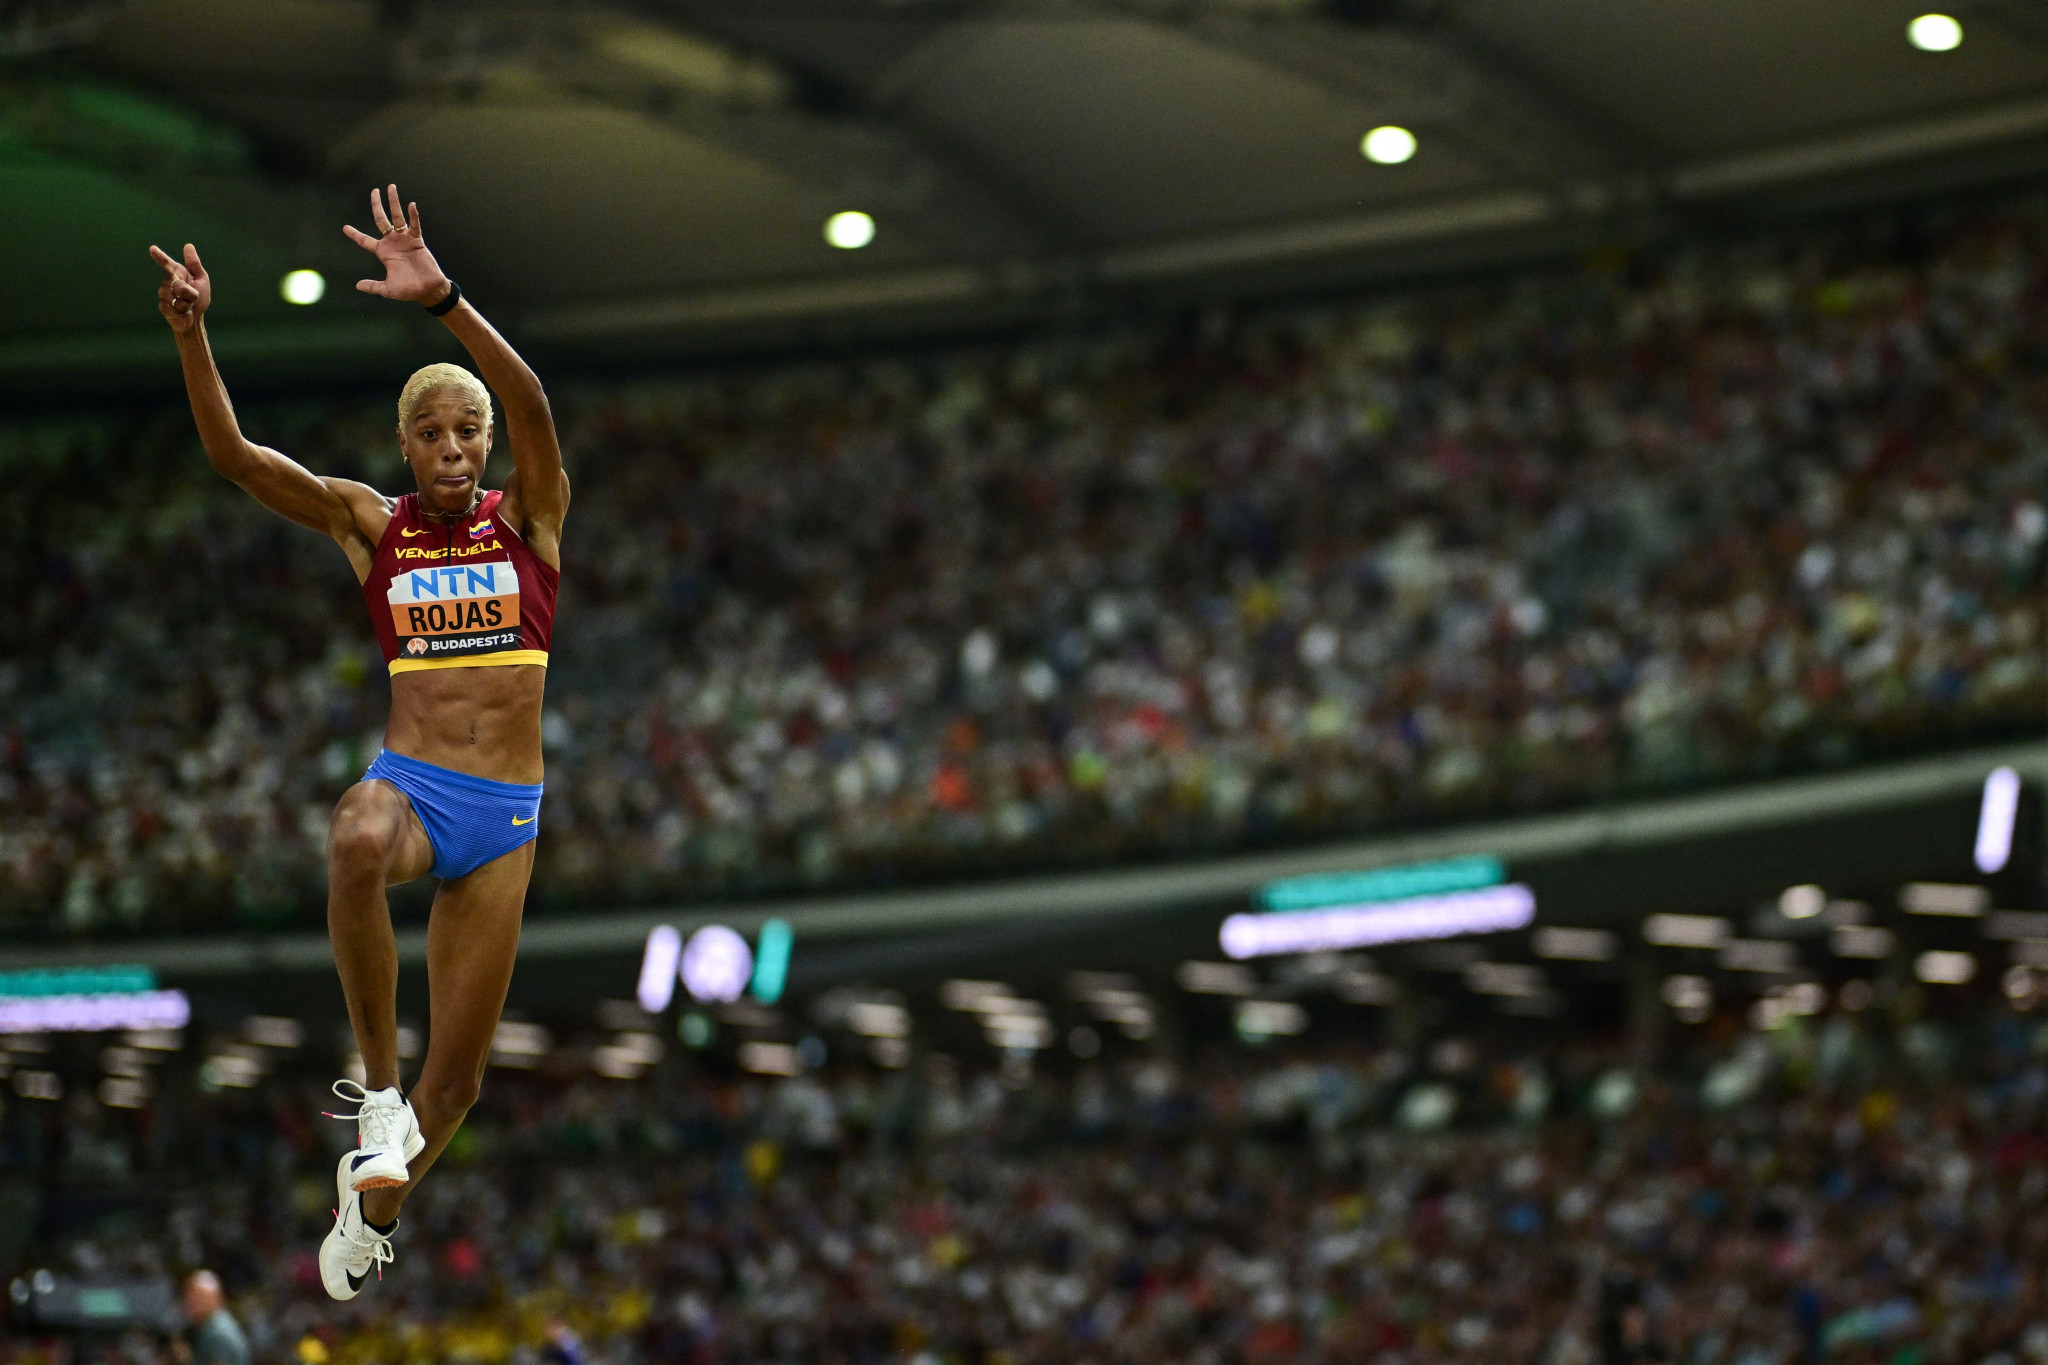 Yulimar Rojas of Venezuela had faced losing her unbeaten streak dating back more than two years in the women's long jump, but propelled hersefl to gold in the final round ©Getty Images